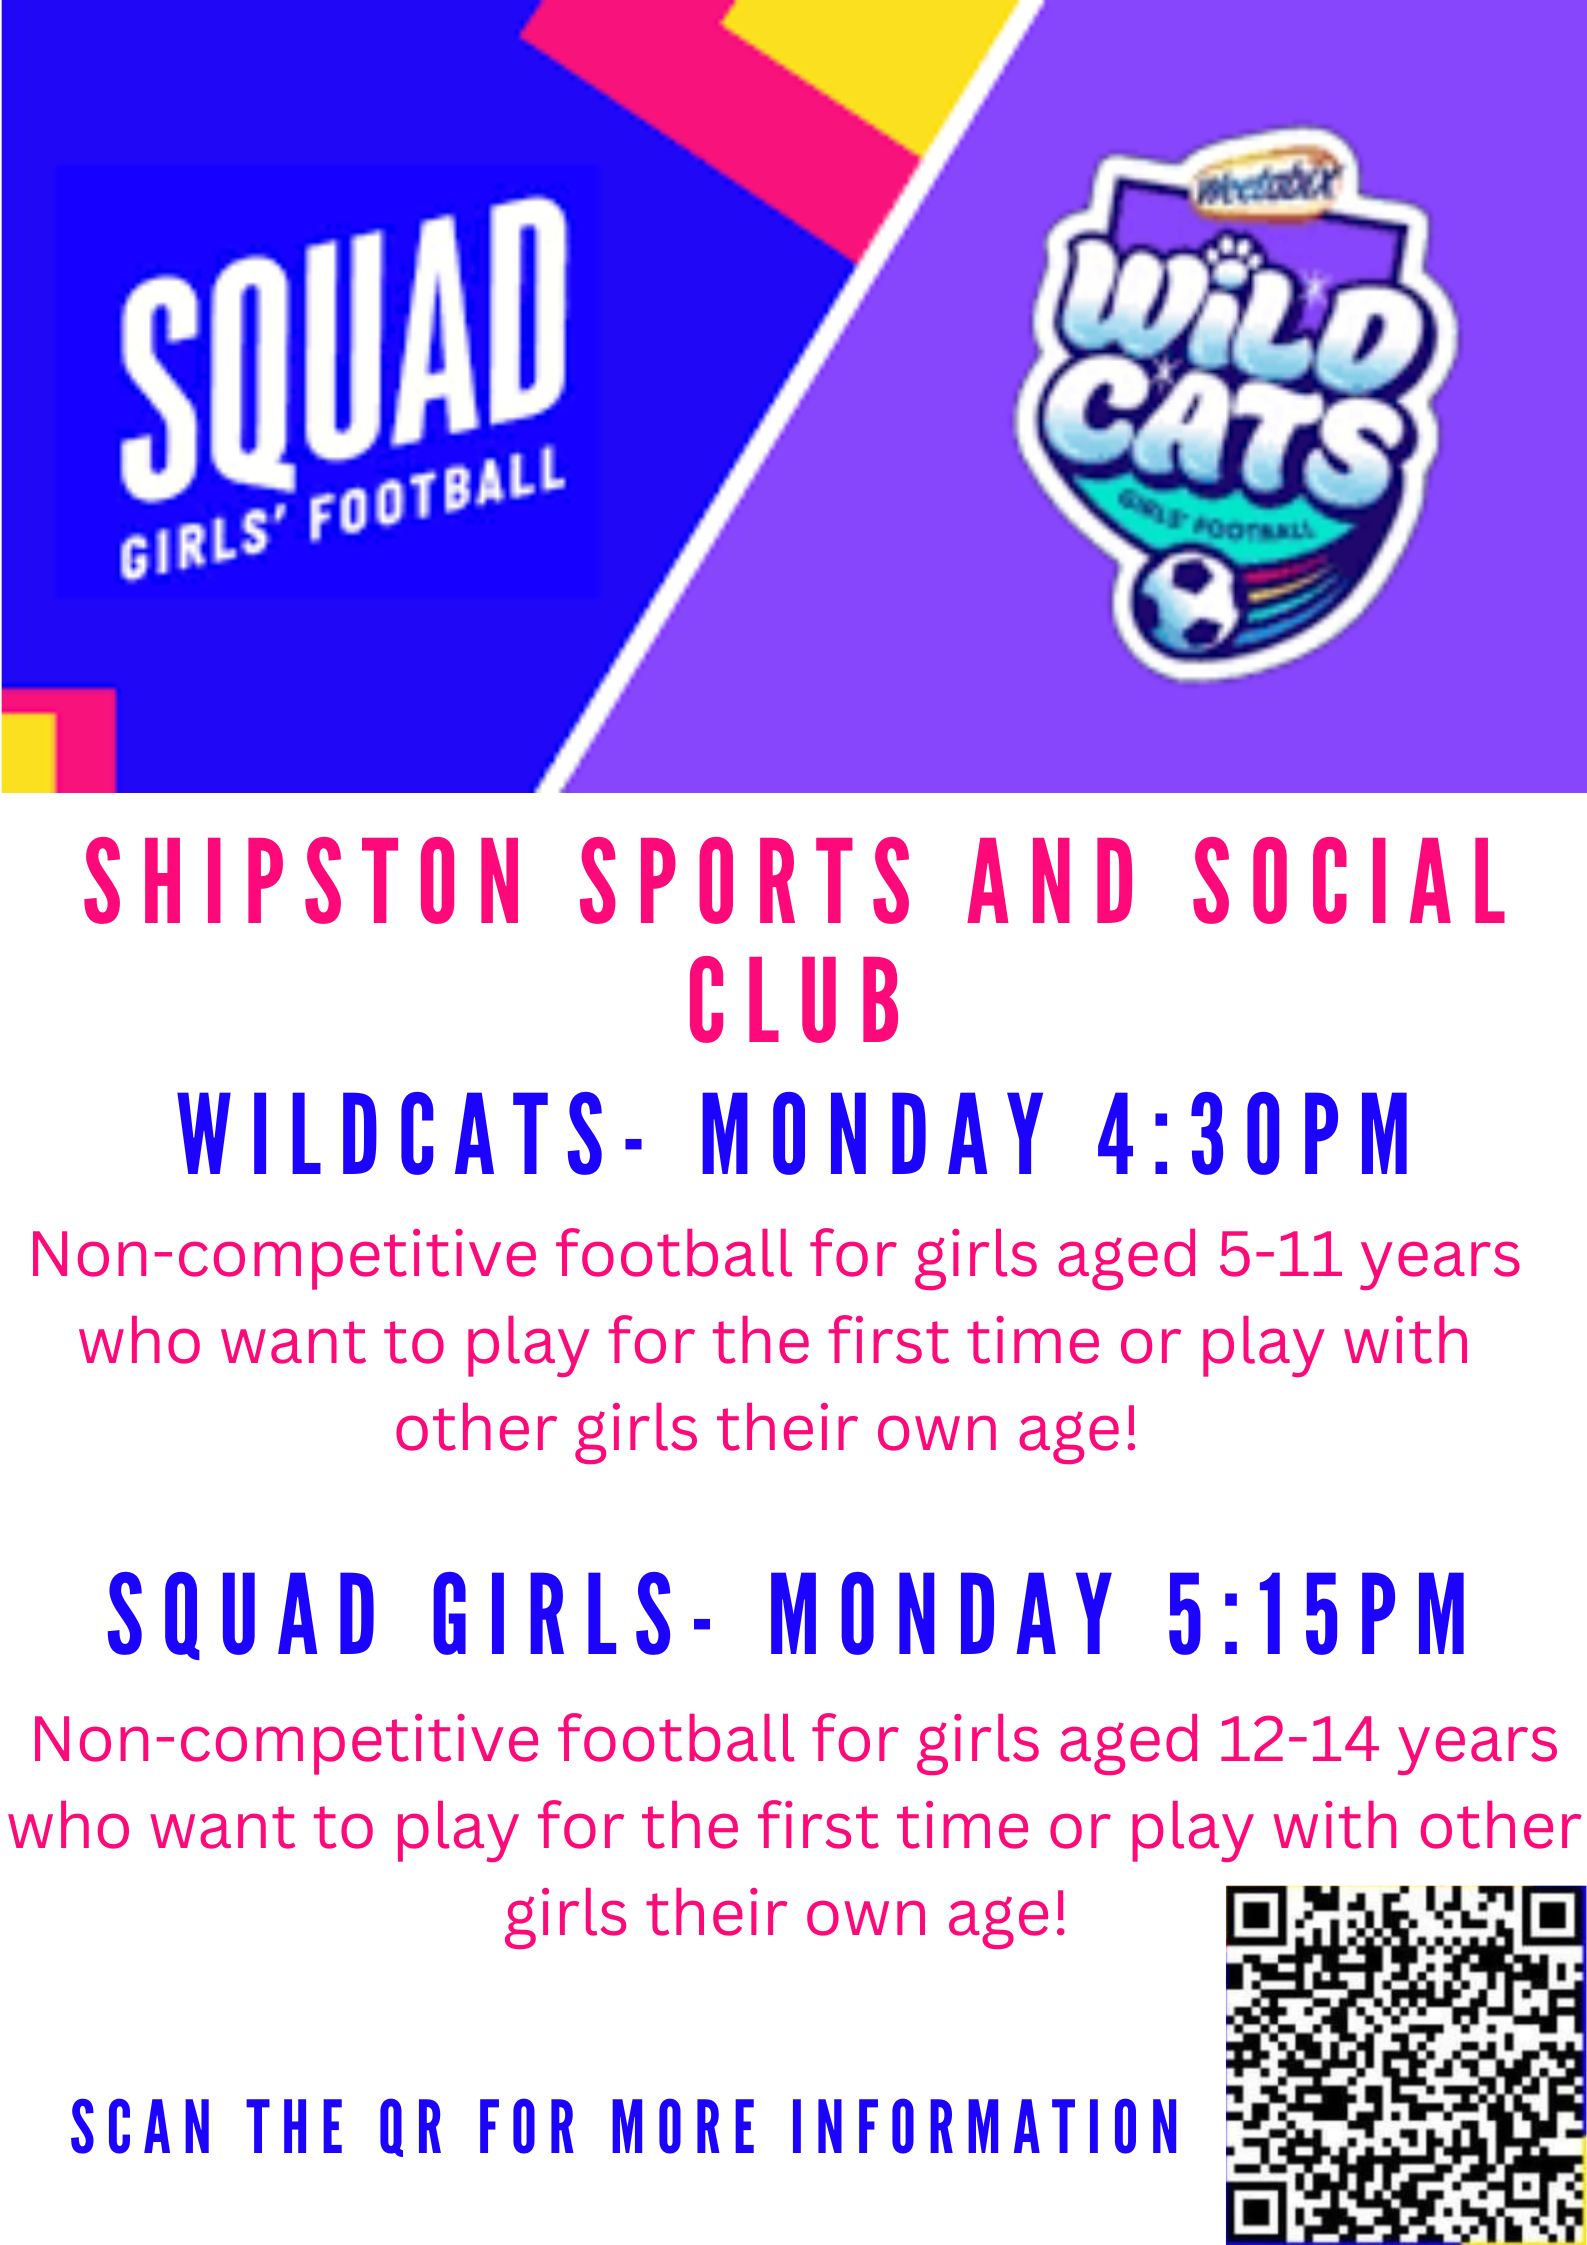 Wild Cats and Squad Girls Football at Shipston Sports and Social Club